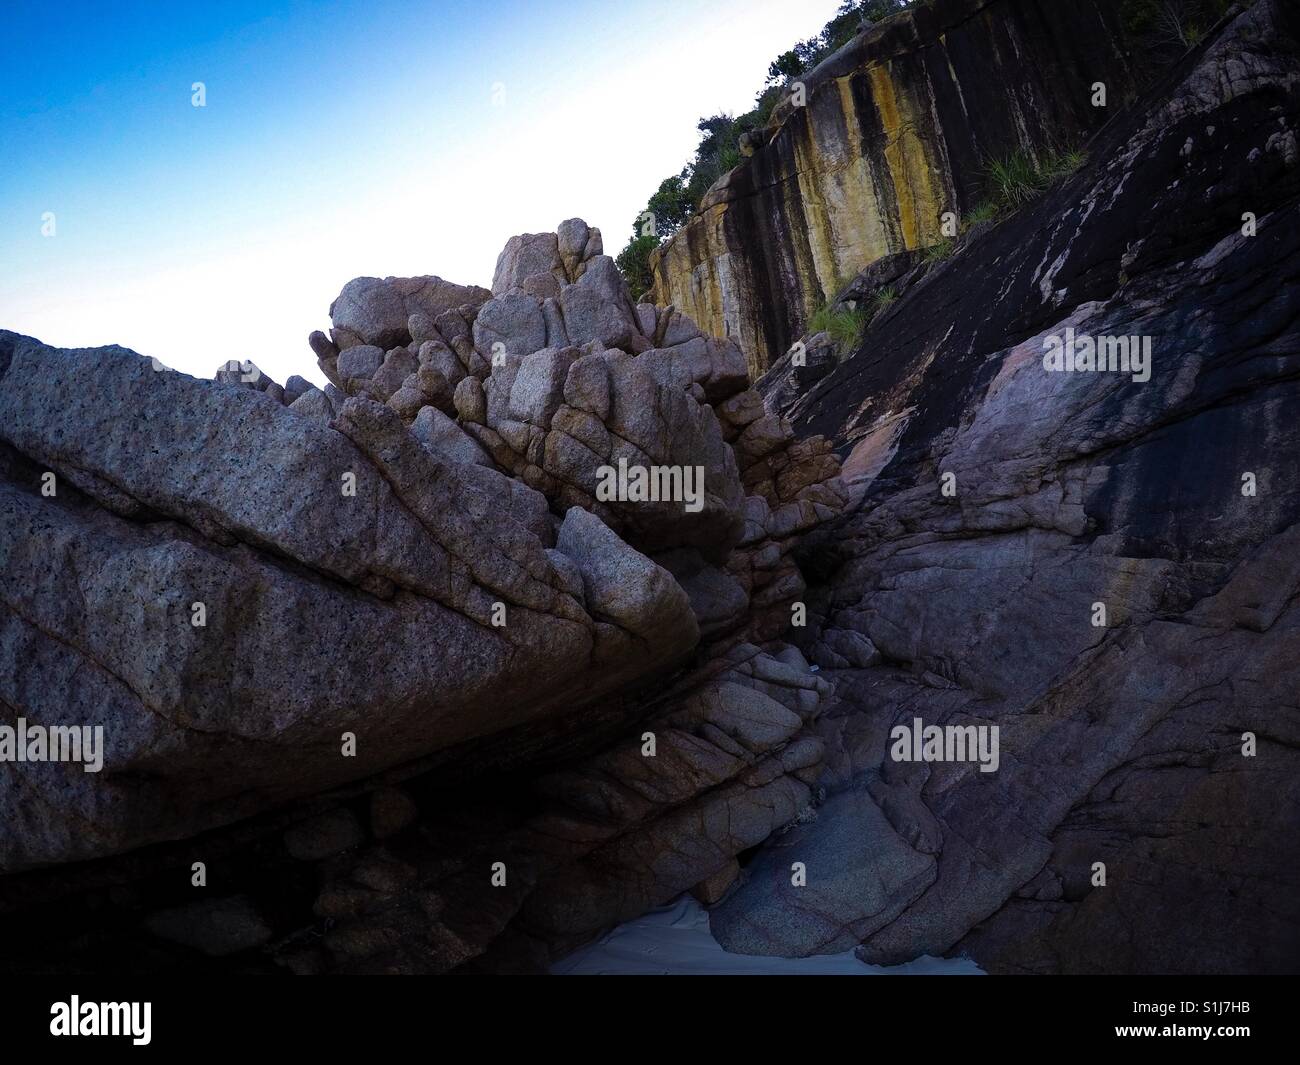 Impressive rock formations by the beach. Redang Island, Terengganu, Malaysia. Stock Photo